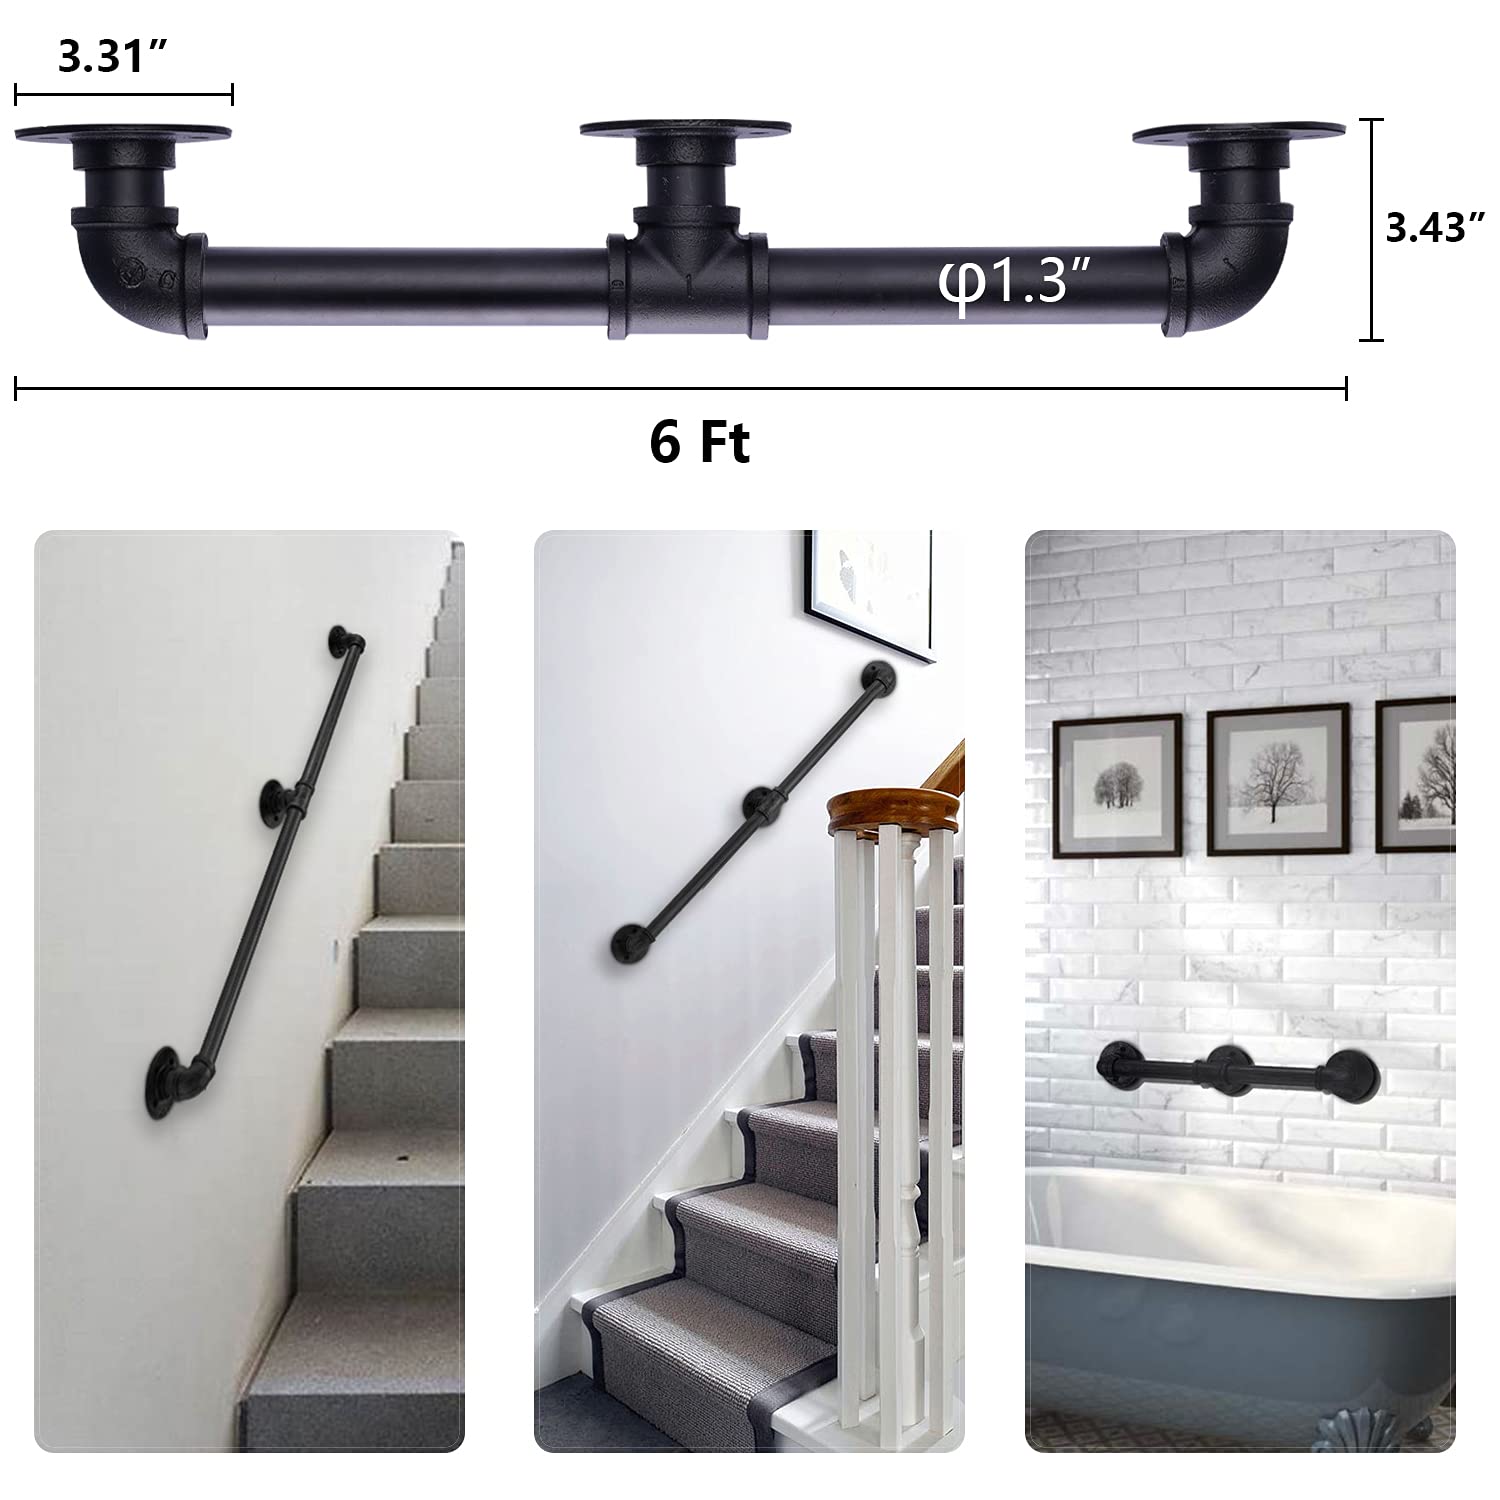 Generic Unilive Metal Industrial Pipe Stair Handrail, 6FT Staircase Handrail, Galvanized Industrial Pipe Railing Indoor